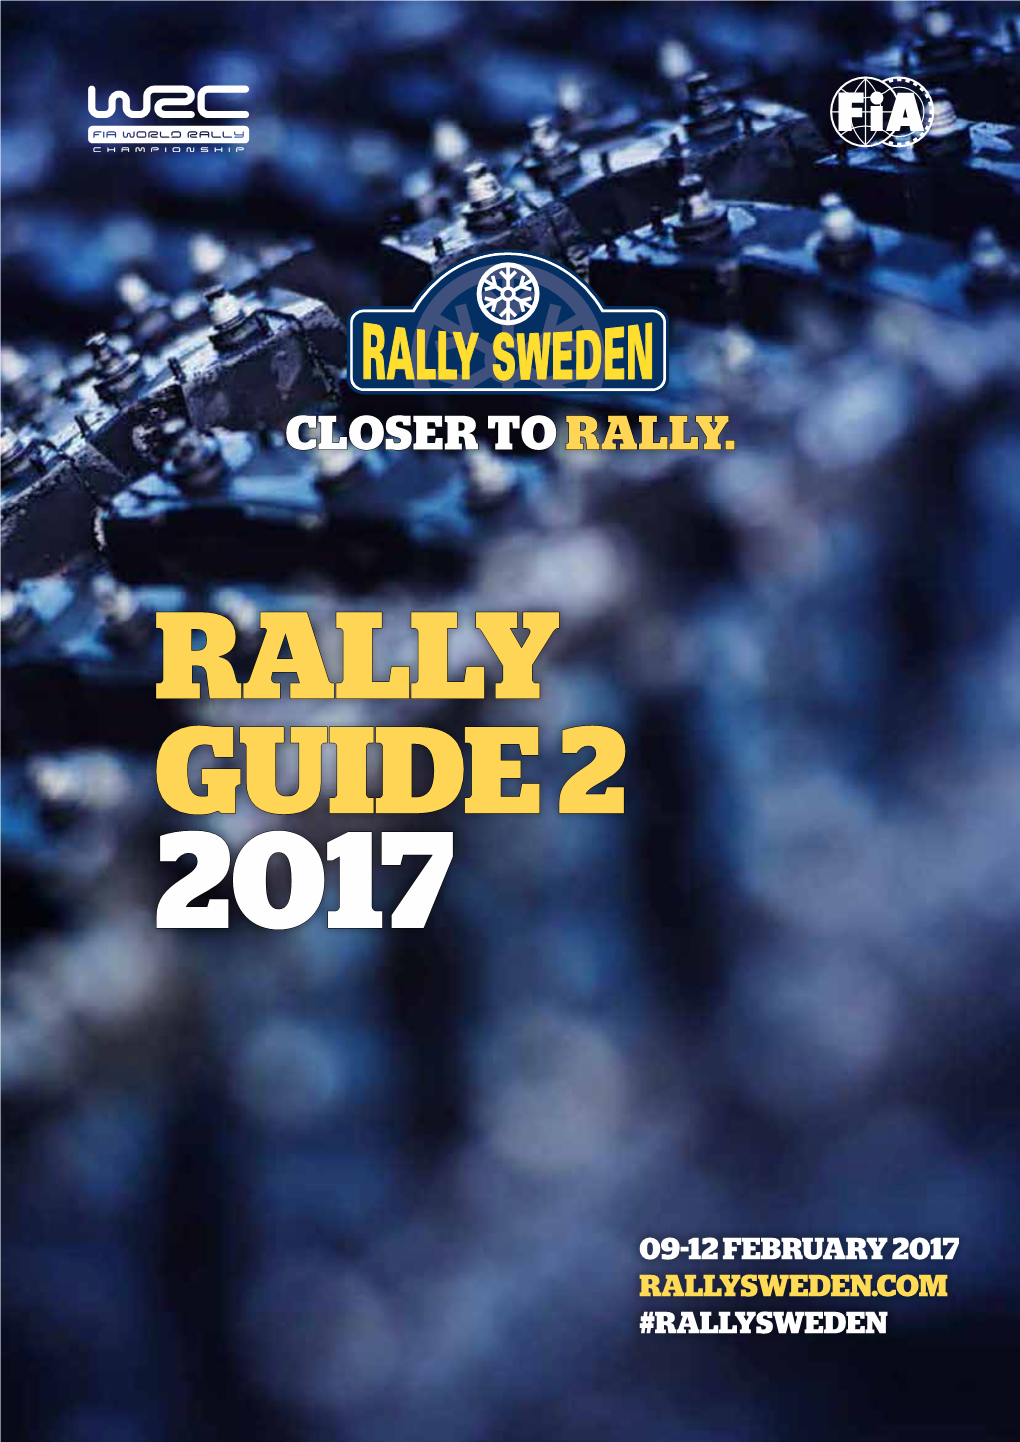 Rally Guide 2 2017